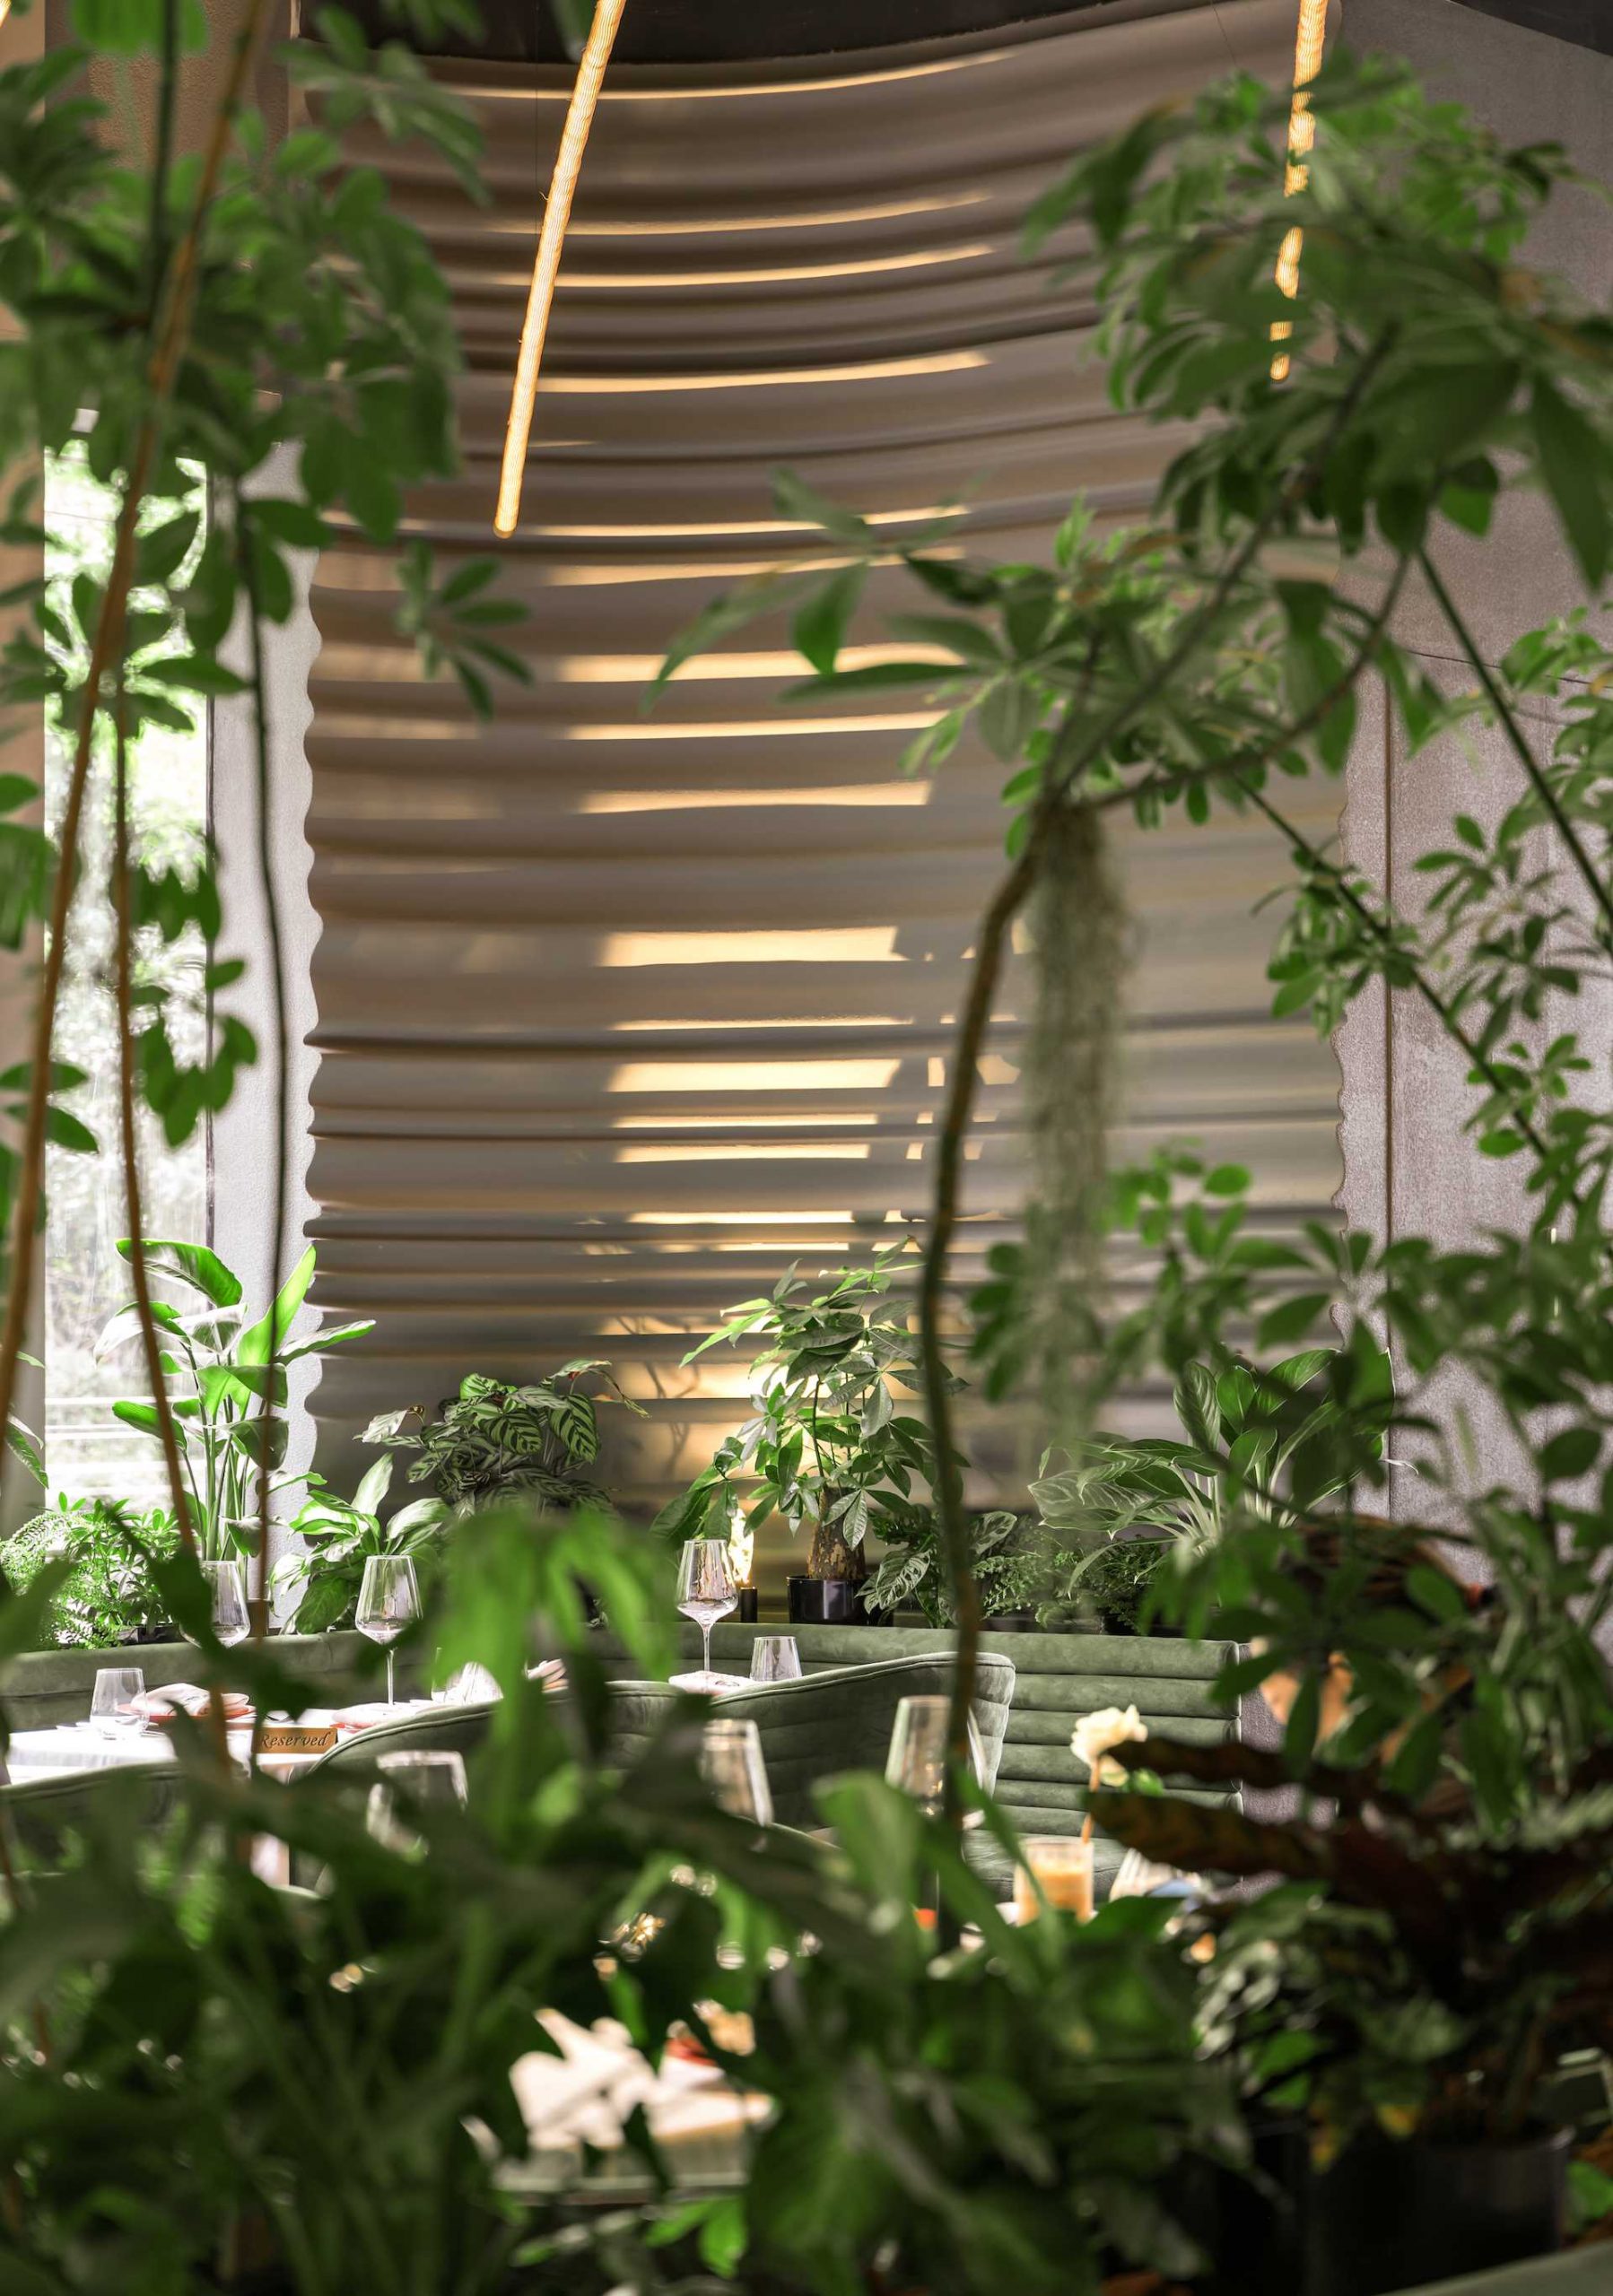 A modern restaurant filled with plants and sculptural walls.